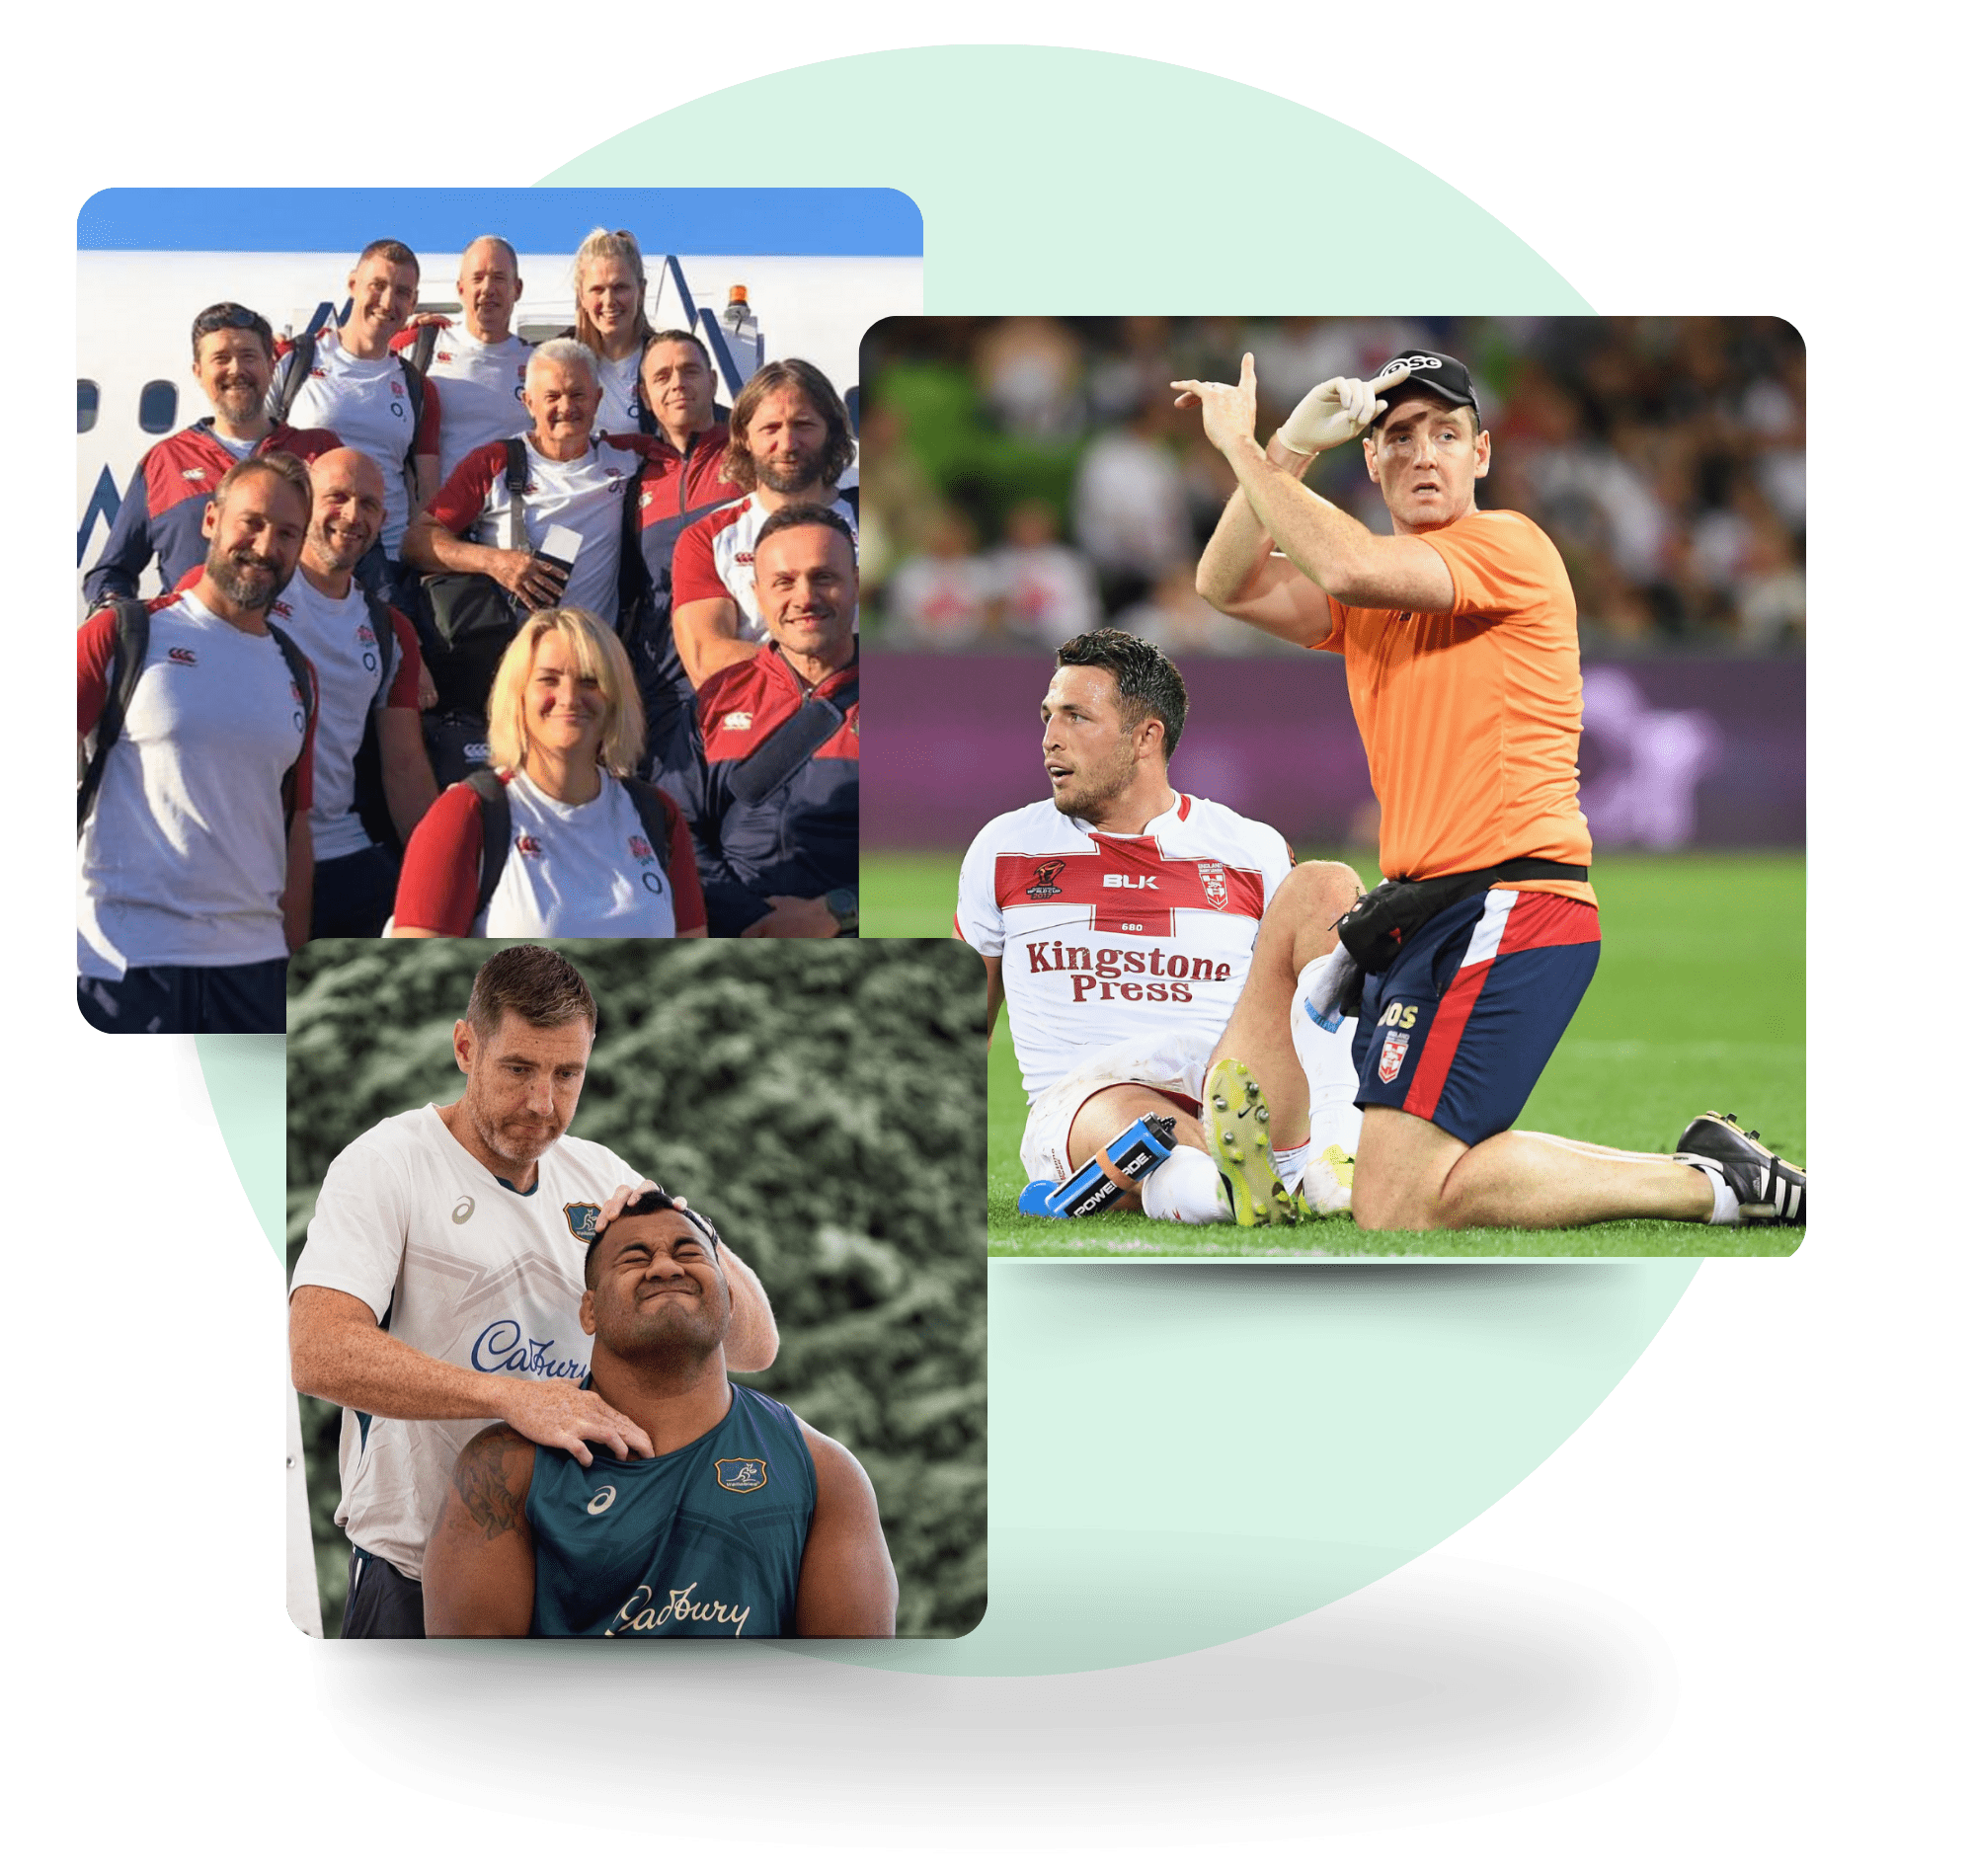 Dave O’Sullivan, Private Practice And Sports Physiotherapist at Rugby World Cups in Japan, France and Australia treating pro sports players